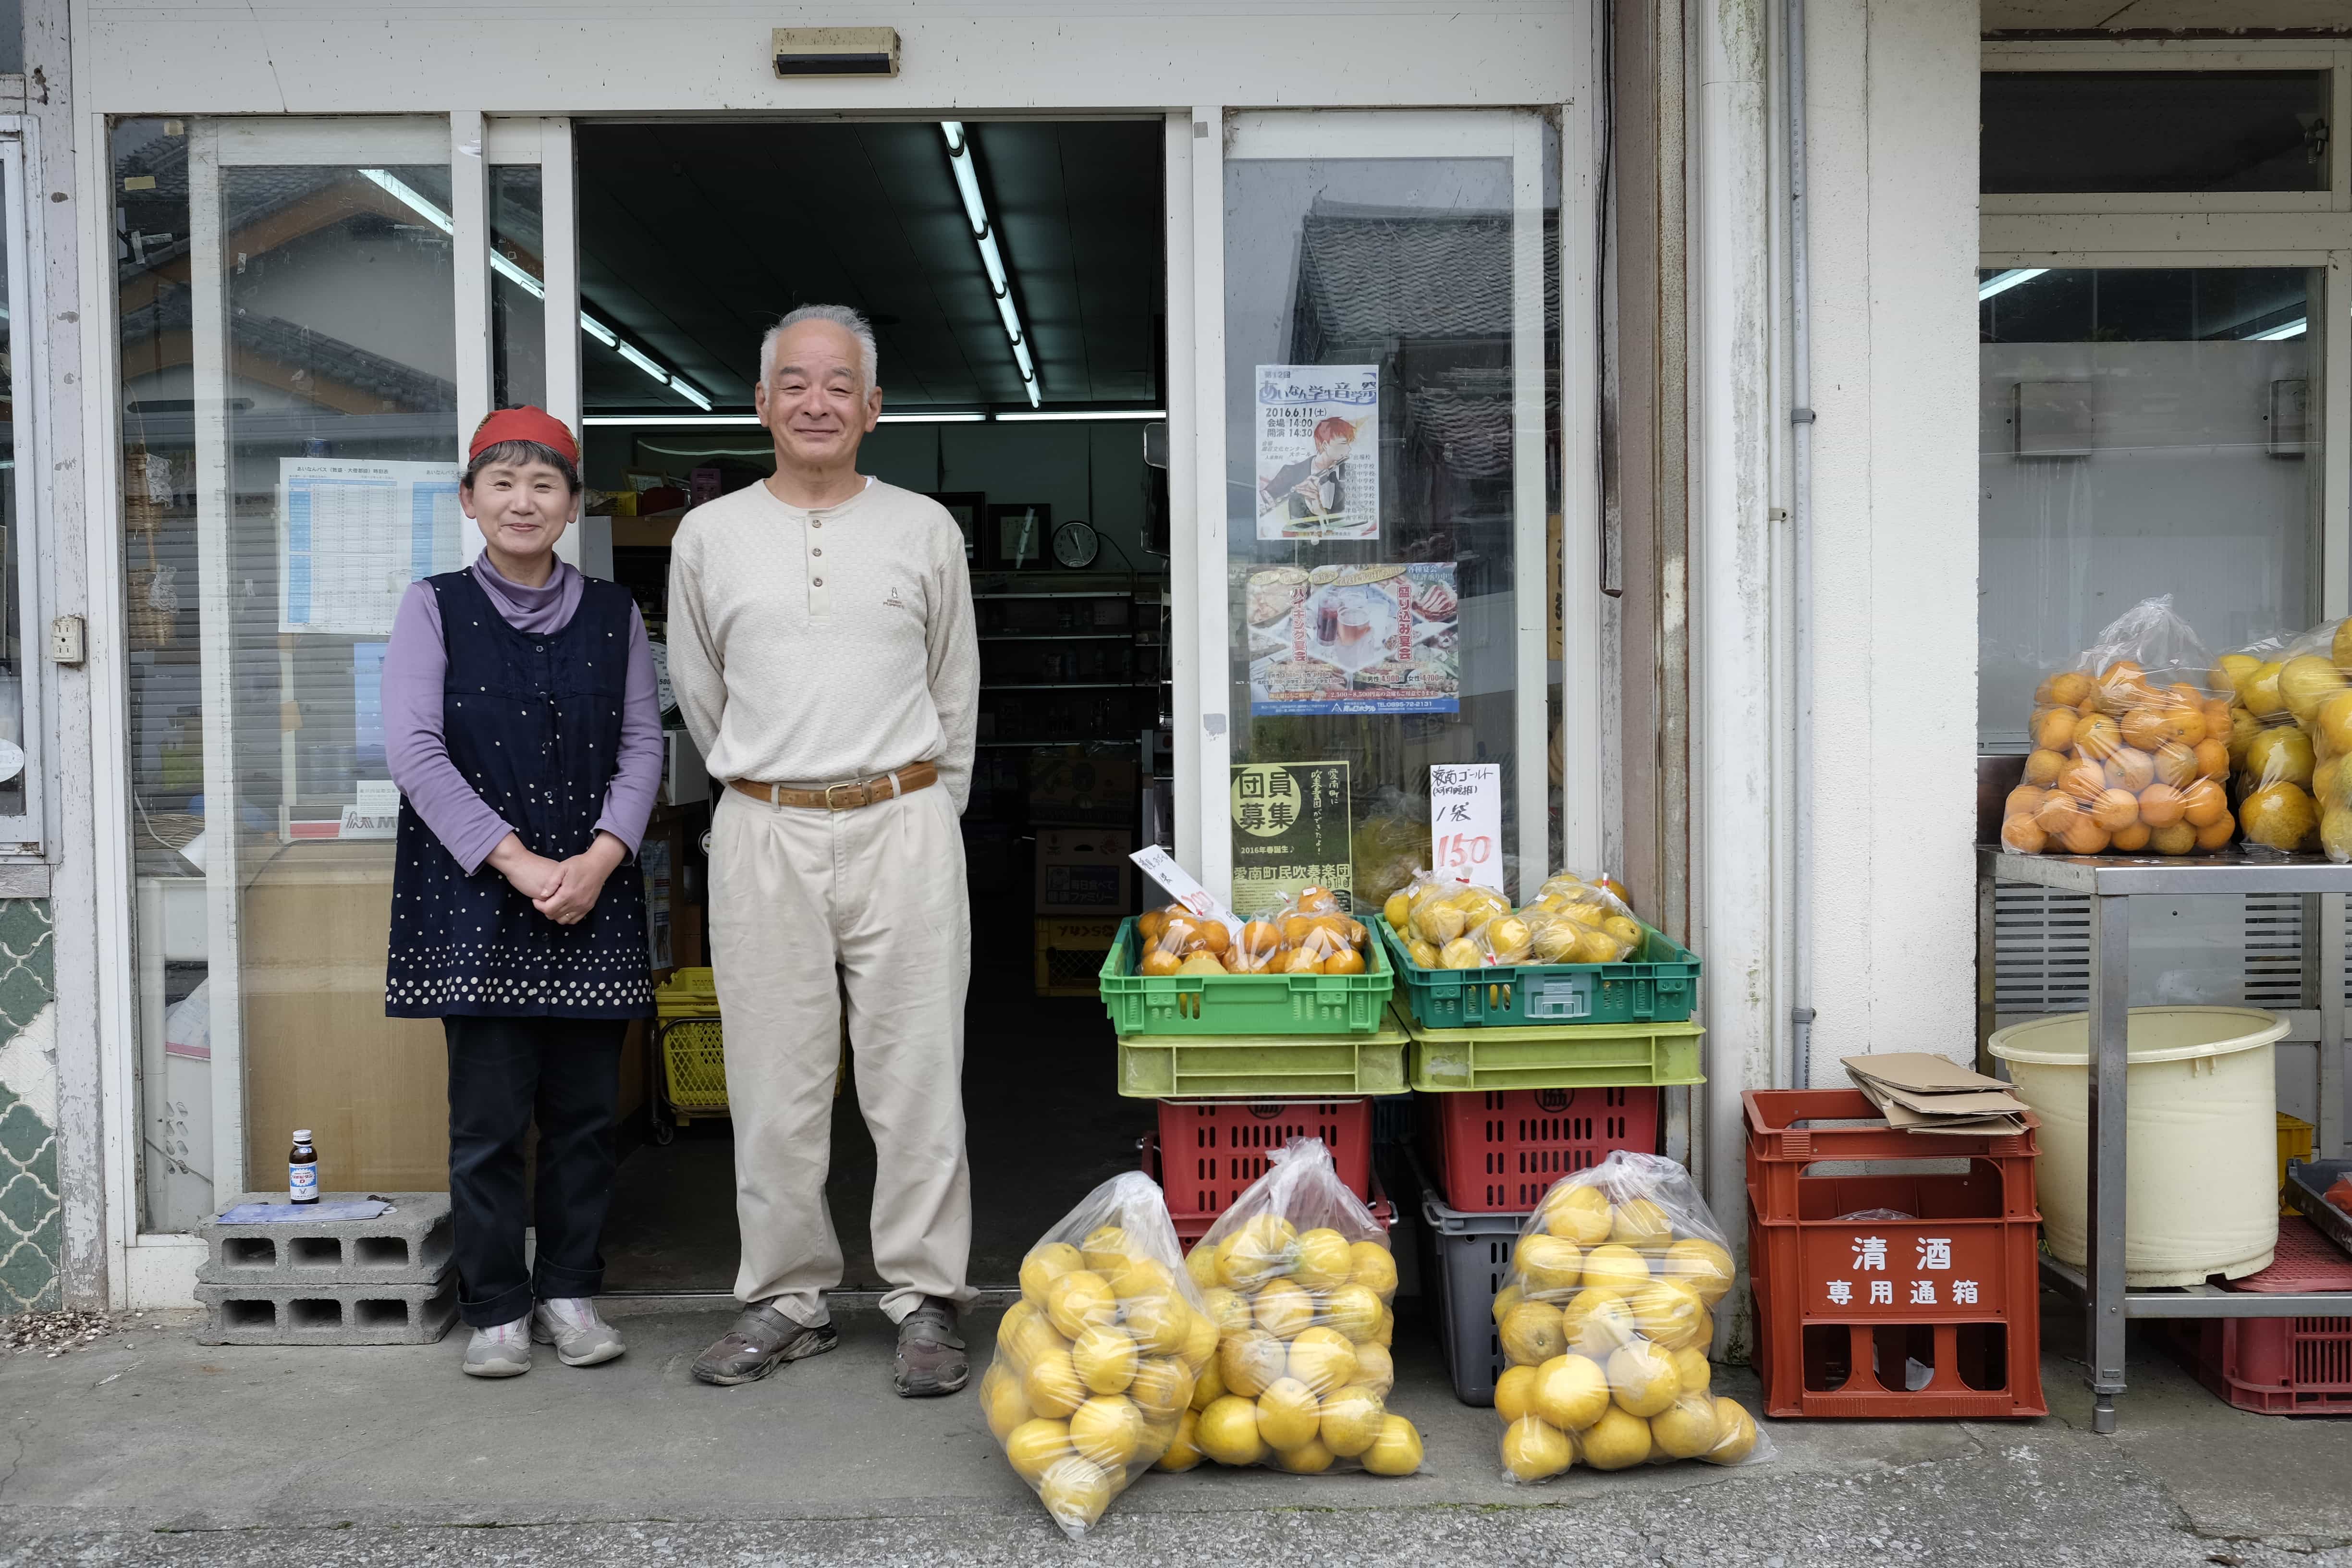 Fruit shop owners